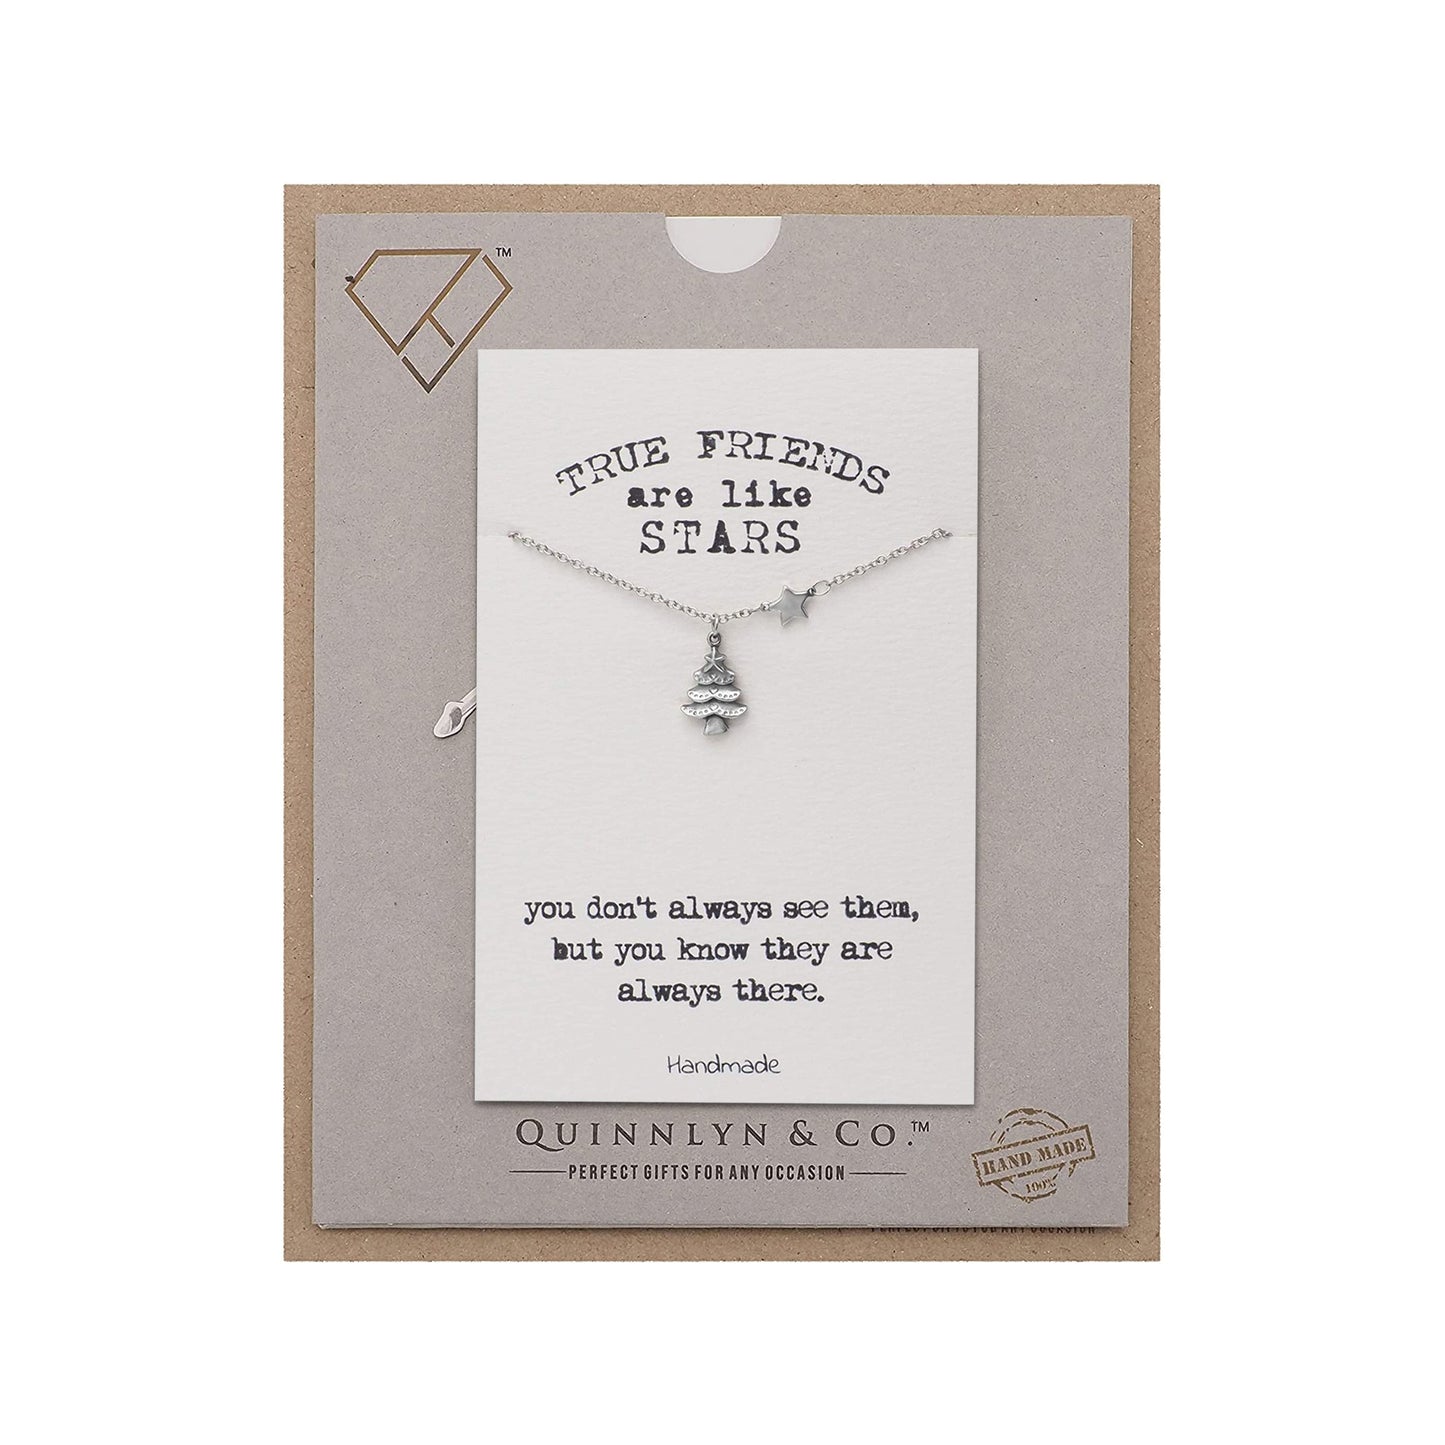 Quinnlyn & Co. Christmas Tree and Star Pendant Necklace, Handmade Gifts for Women with Inspirational Quote on Greeting Card